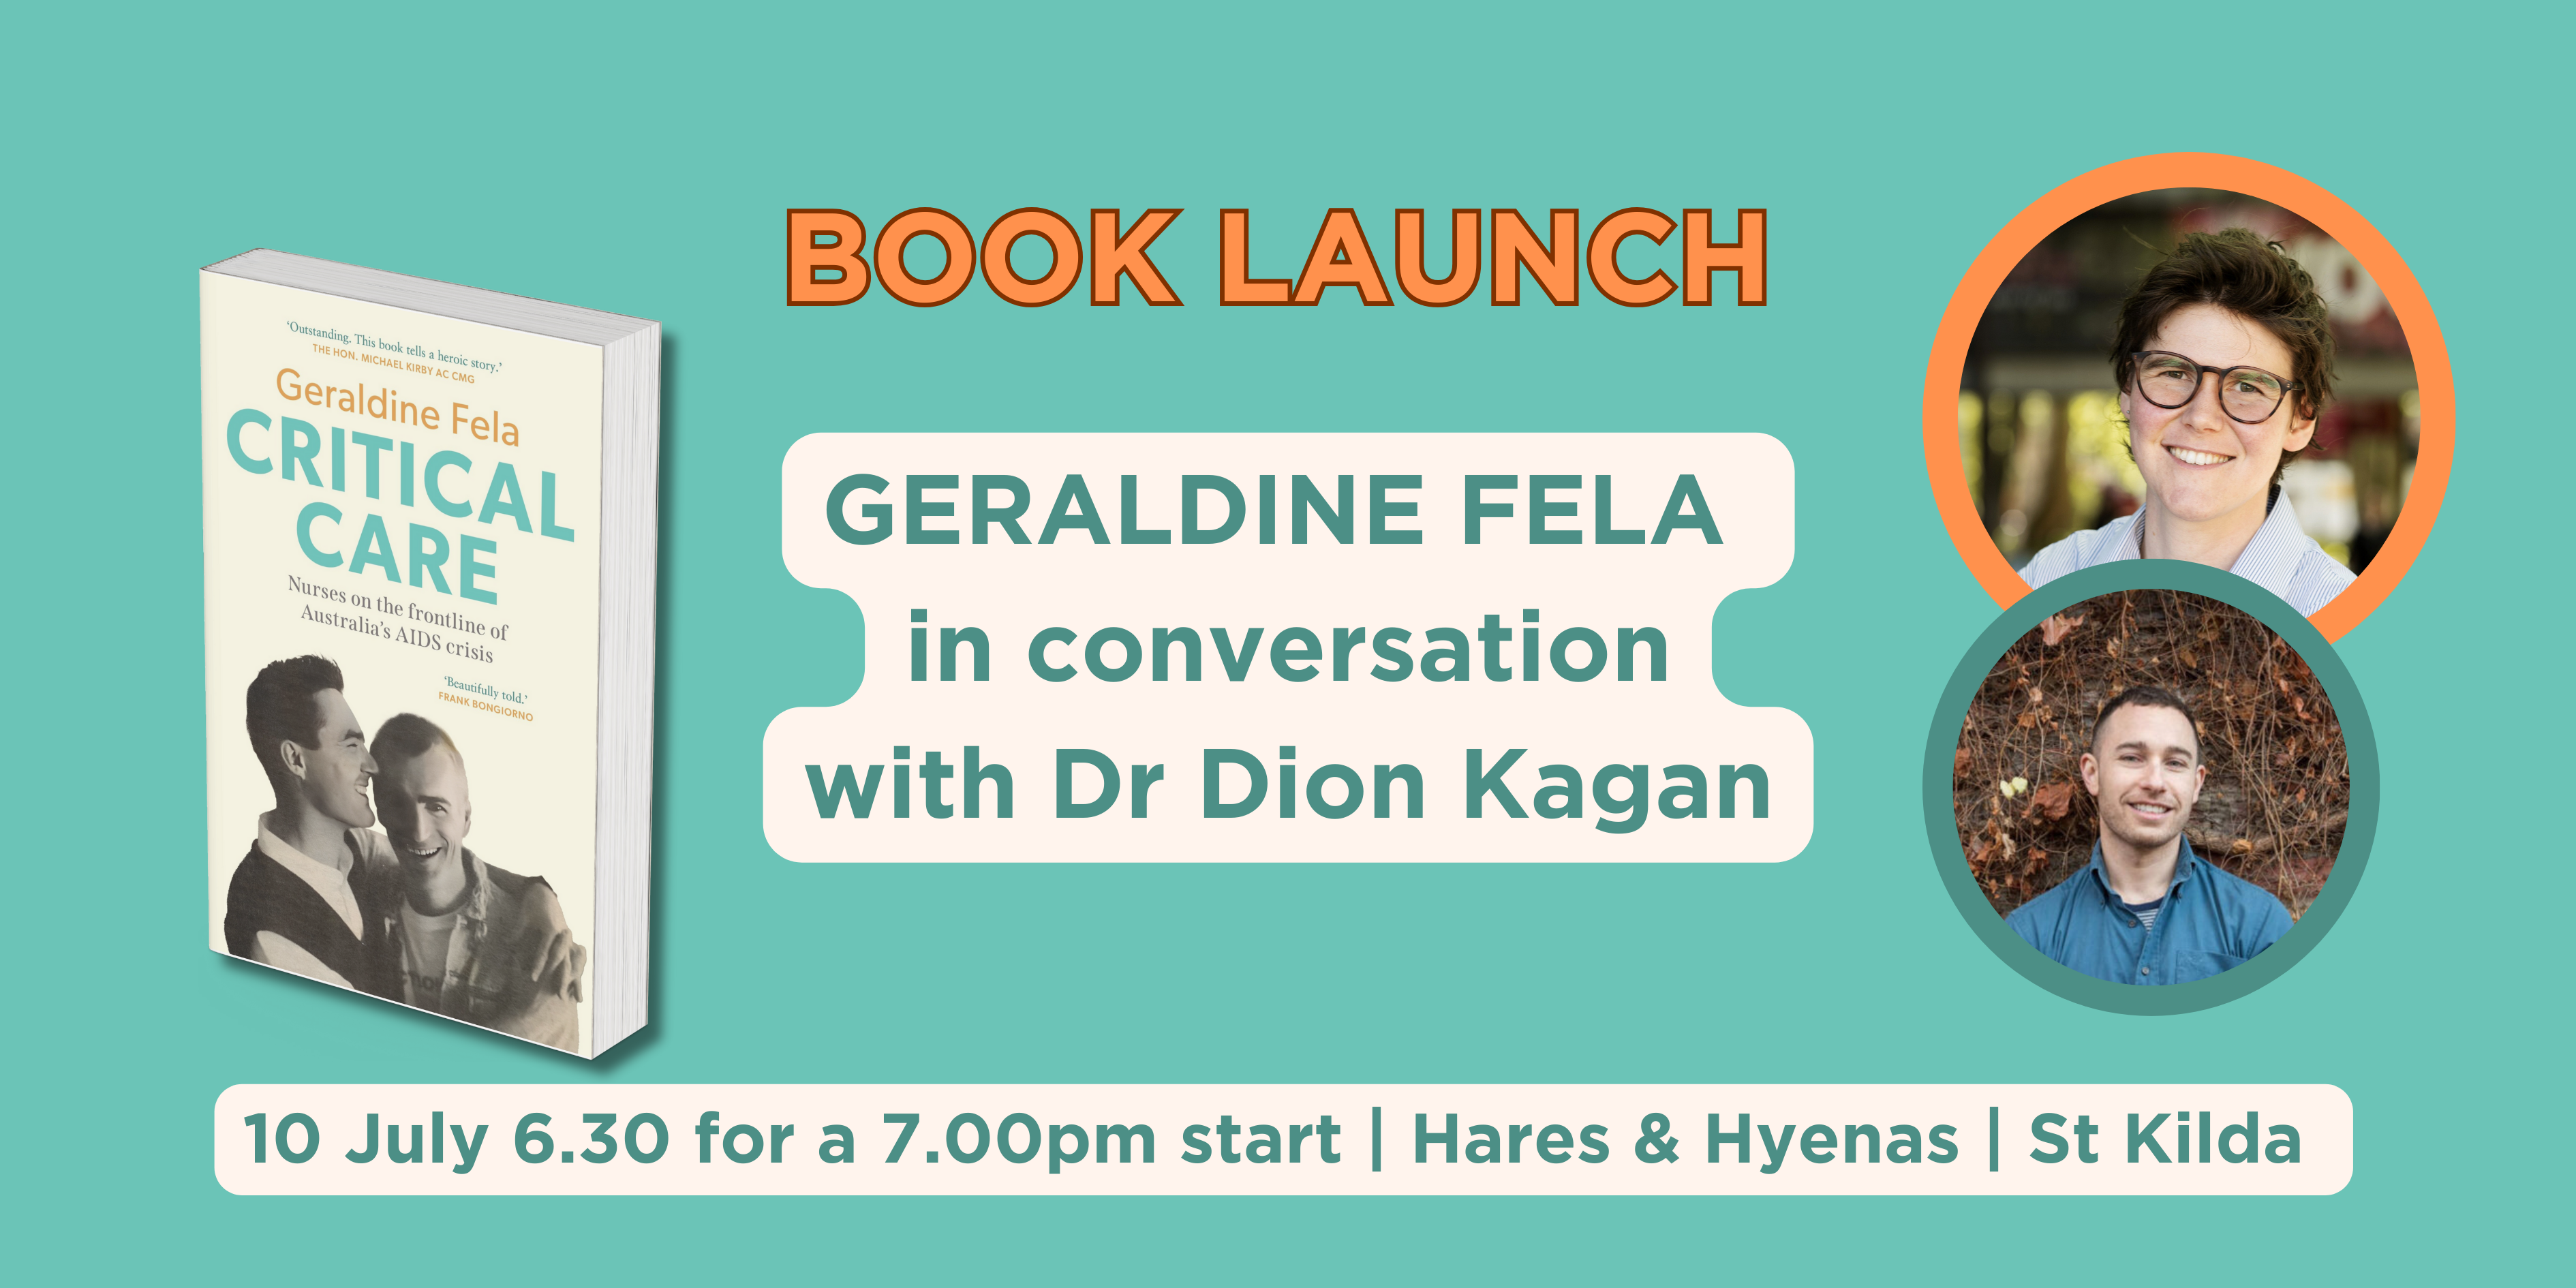 Book launch for Critical Care by Geraldine Fela detailing the date, time and location of the launch